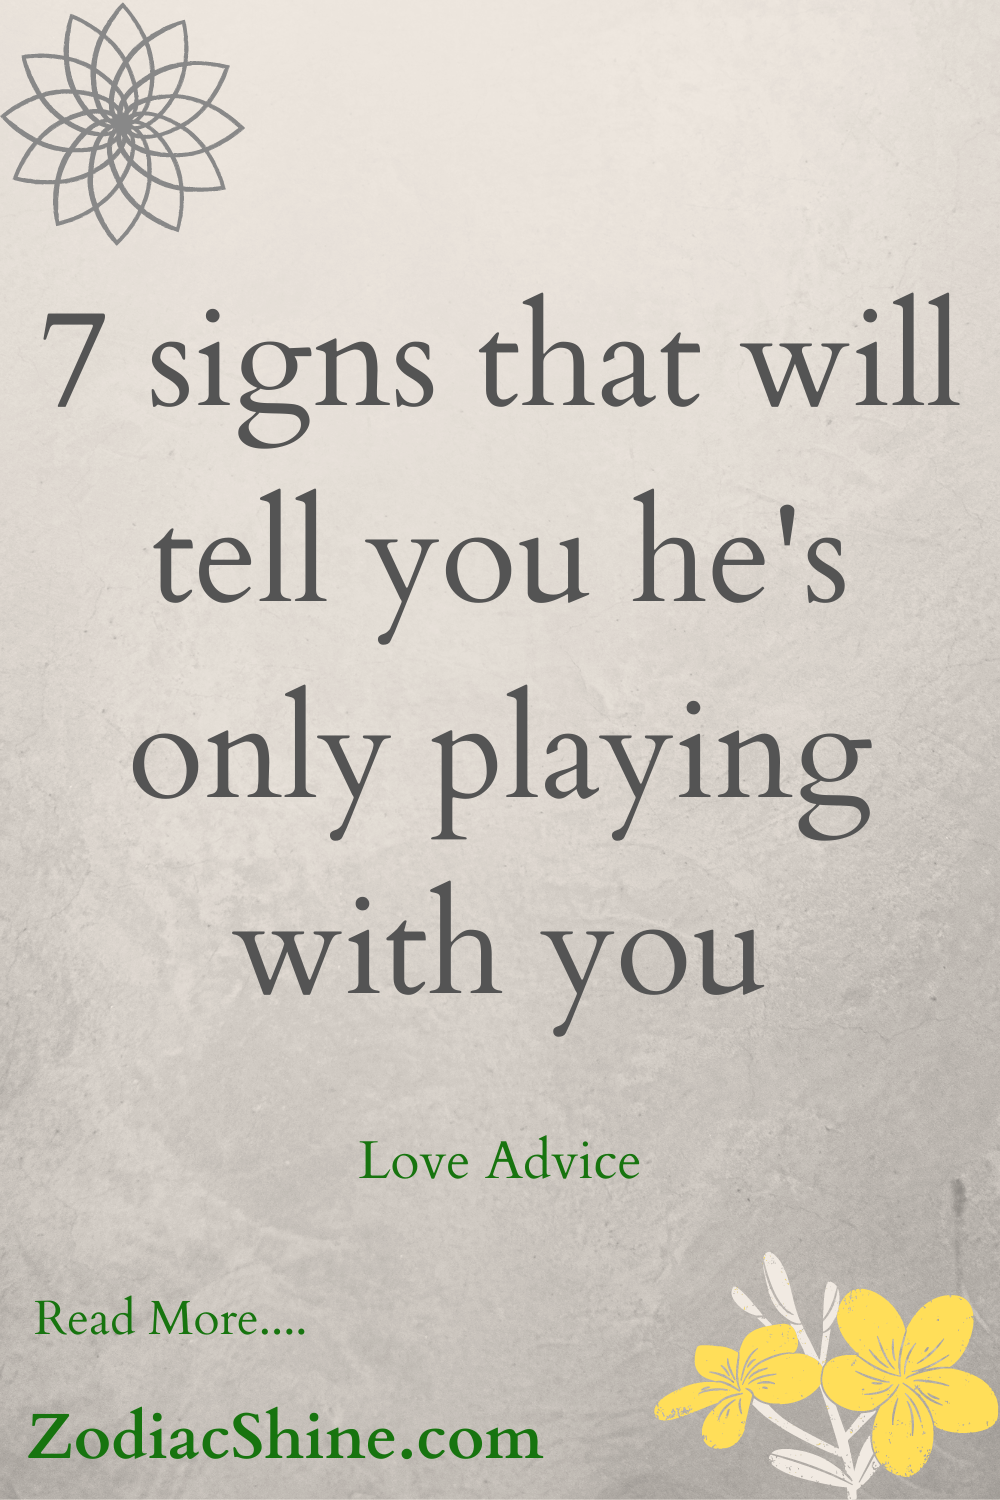 7 signs that will tell you he's only playing with you